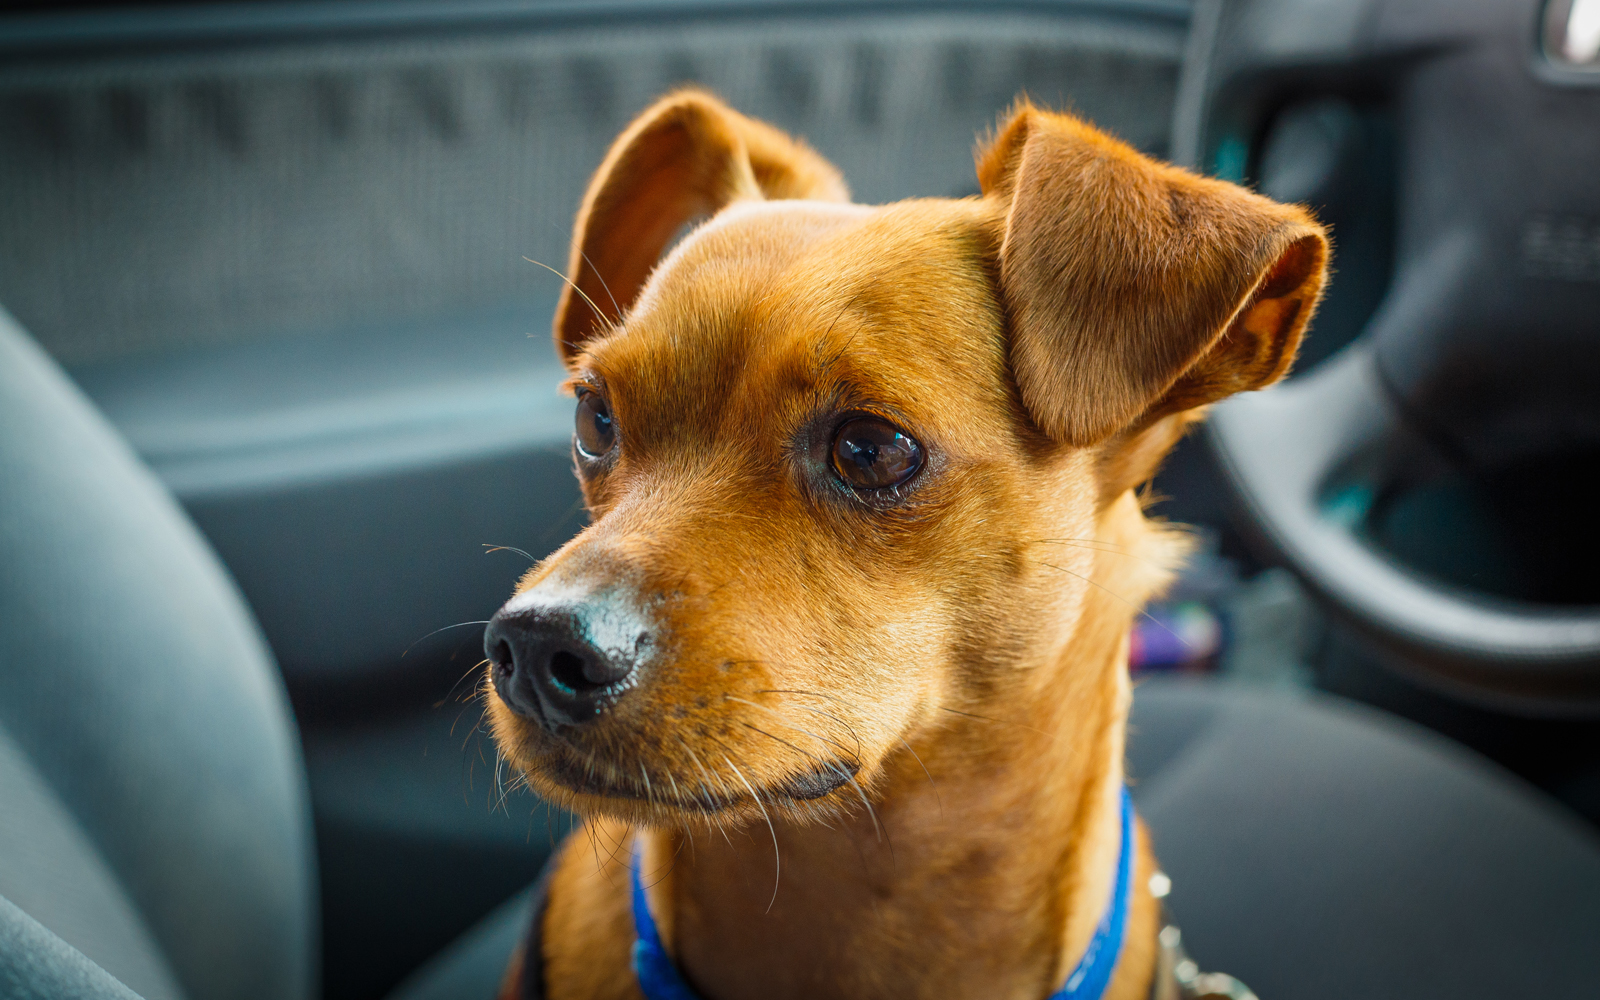 Don’t Leave Pets in Hot Vehicles: Facts to Know and Actions to Take